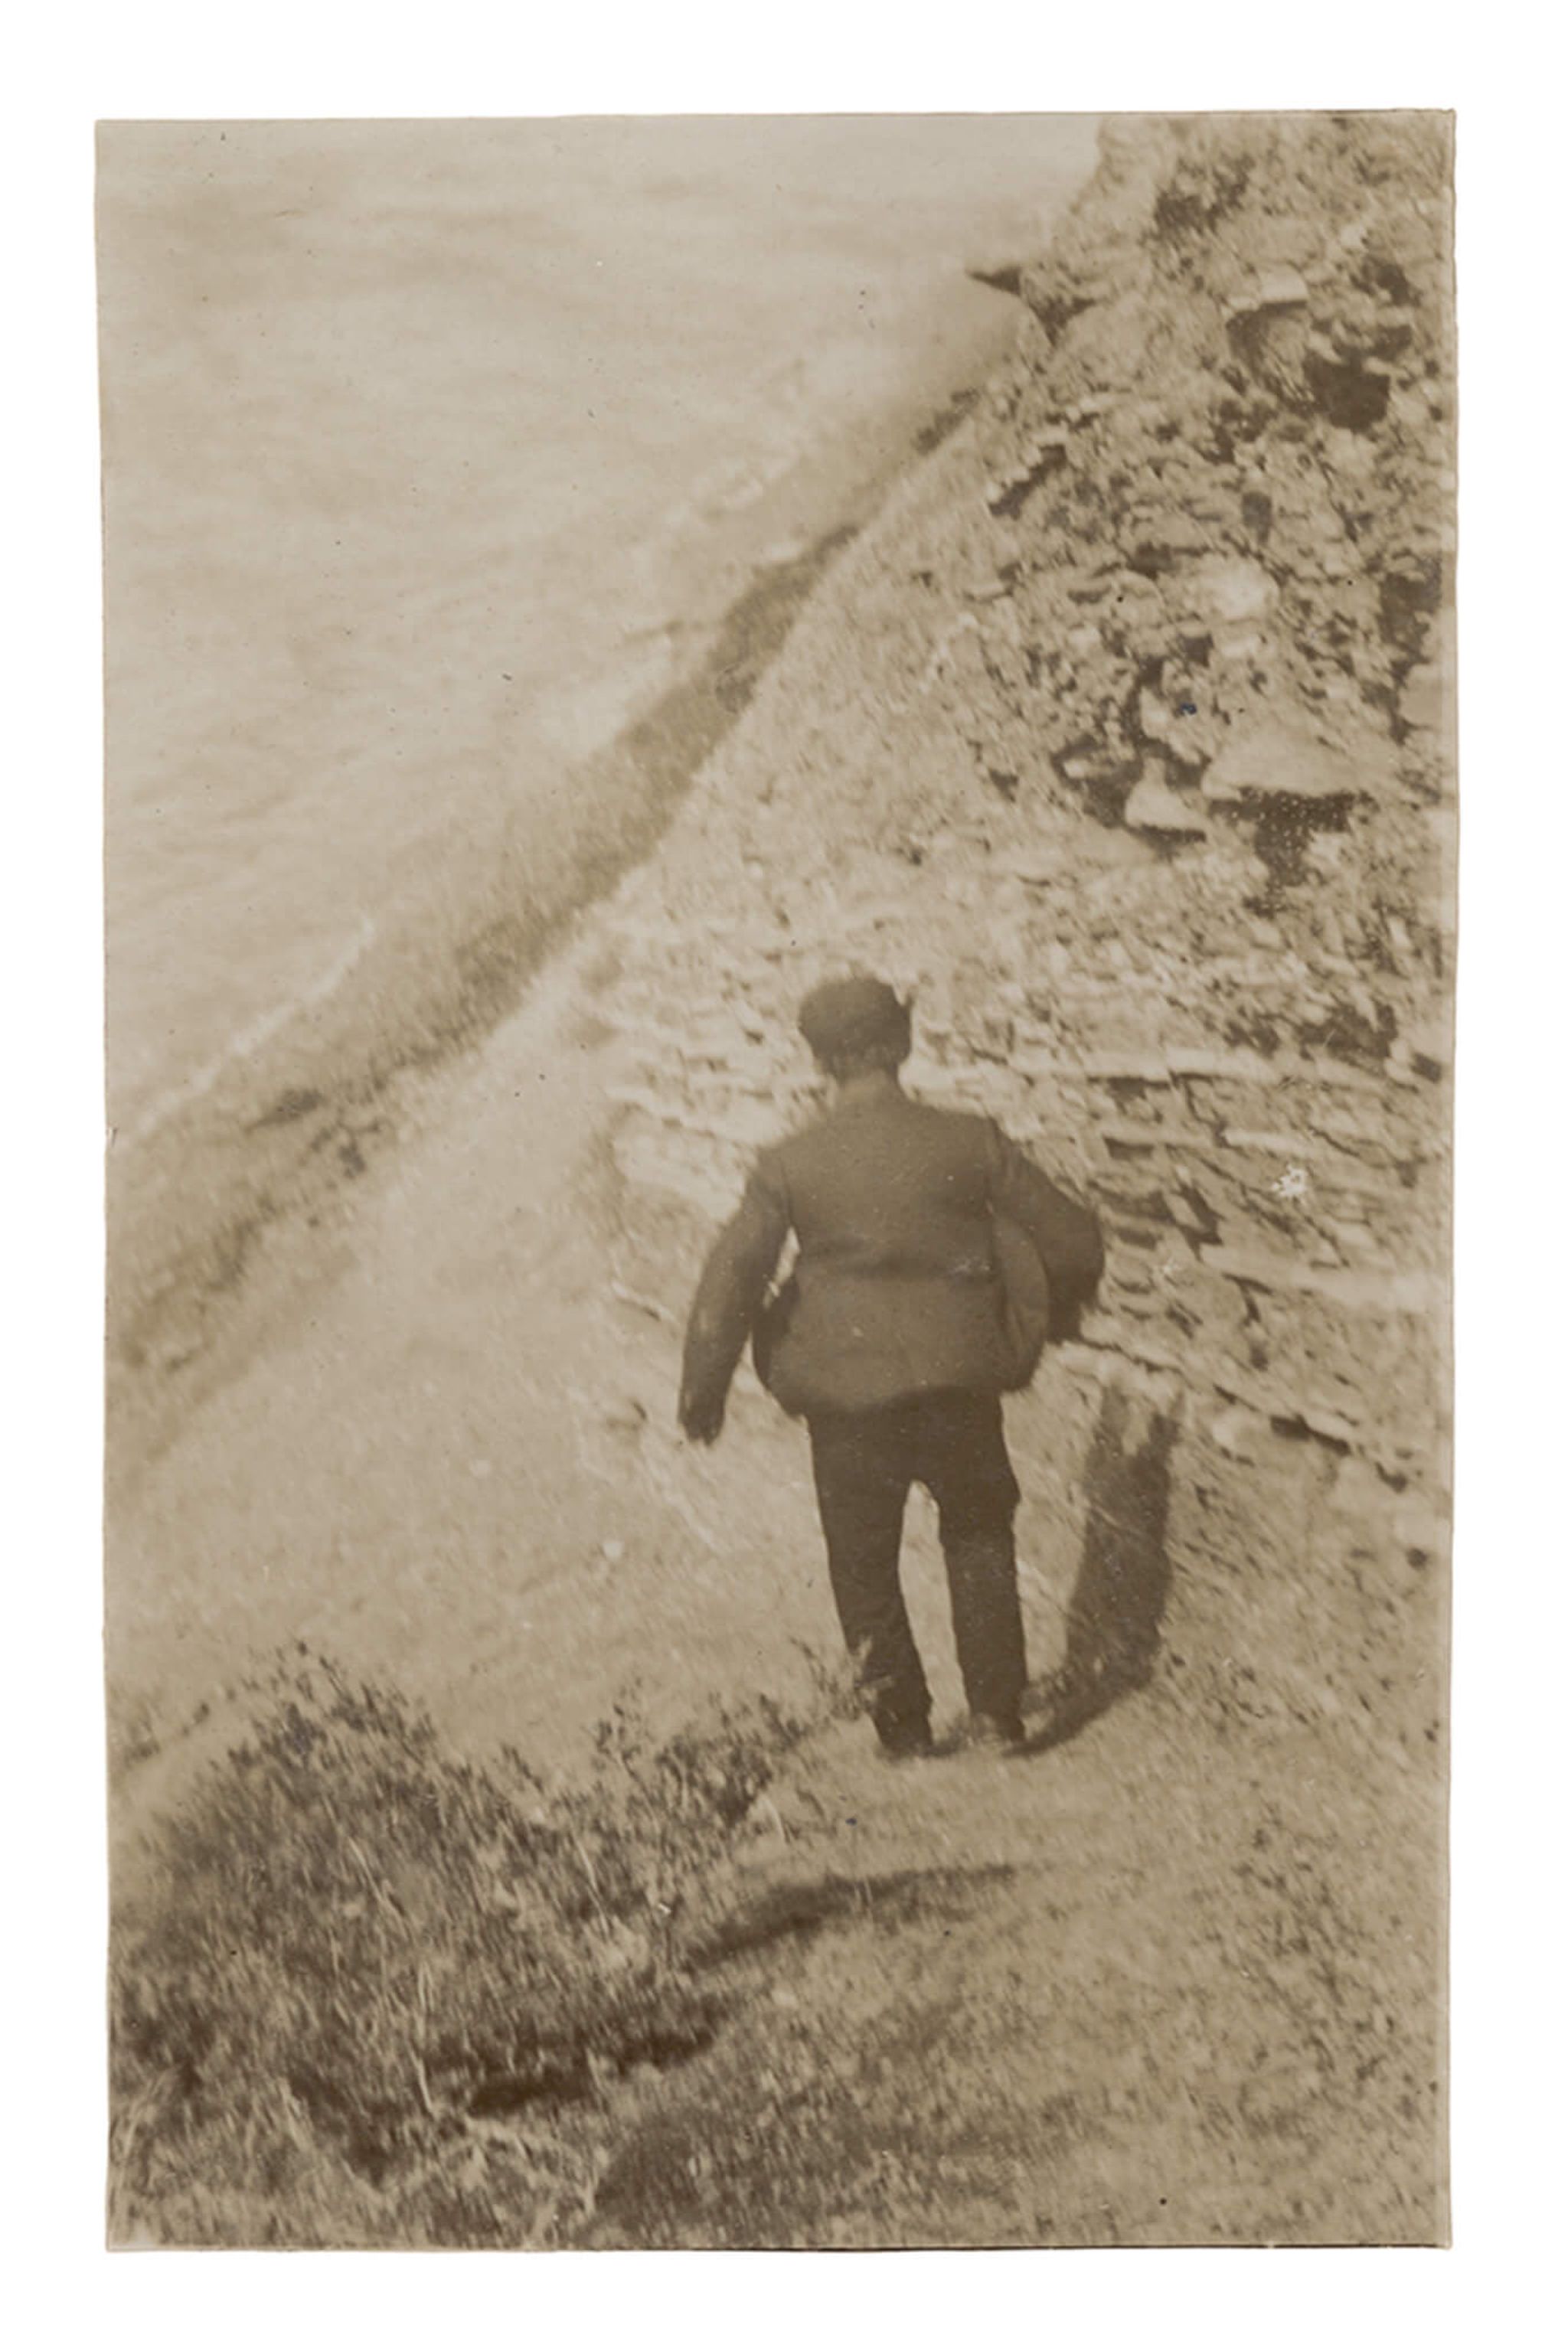 Image for: The Man, Going Down the Mountain Towards the Sea